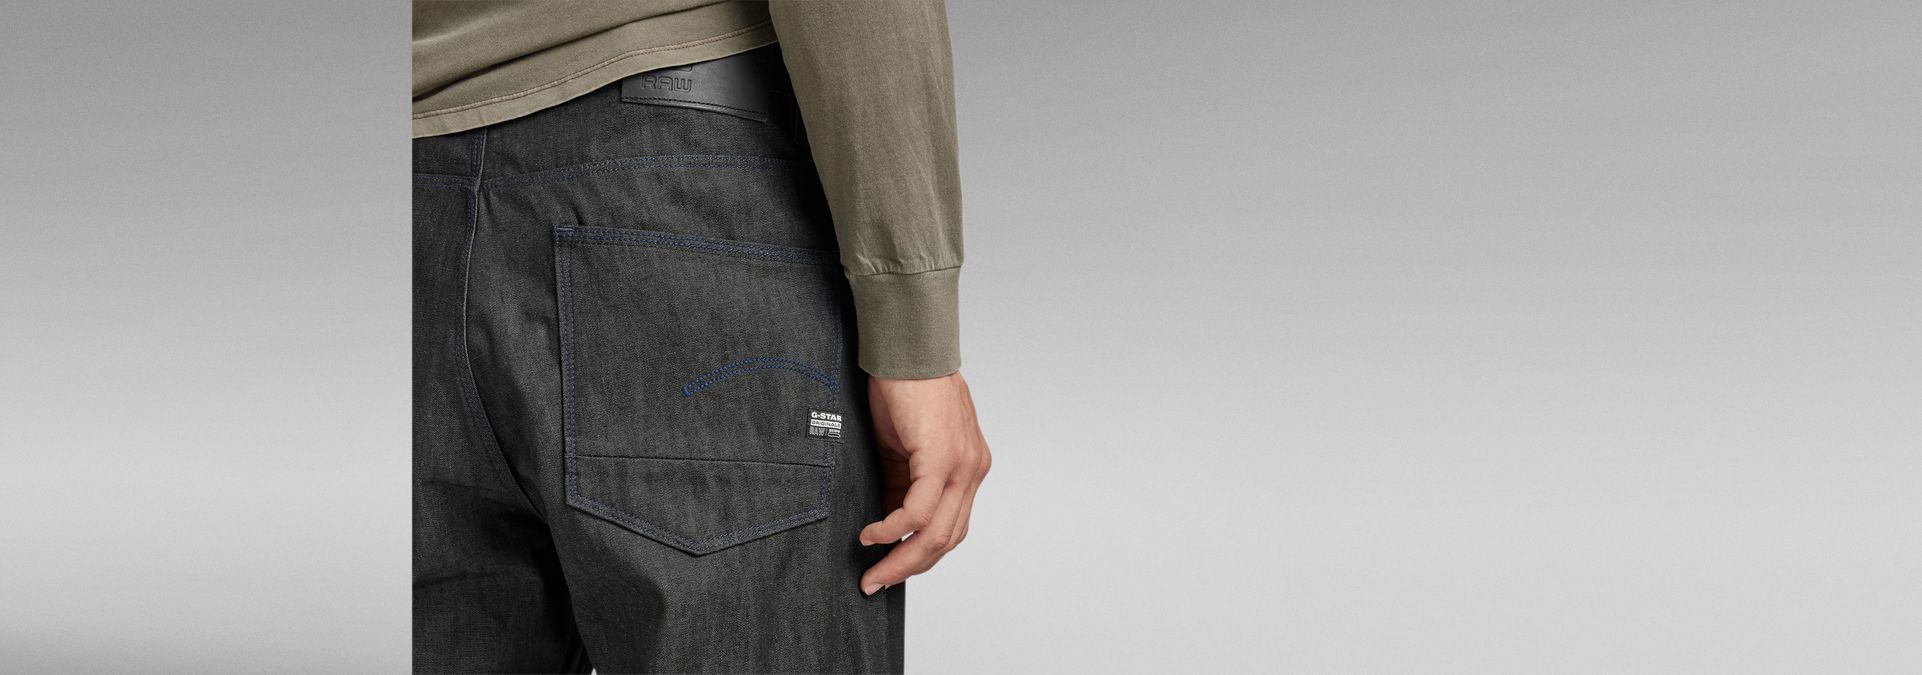 Grip 3D Relaxed Tapered Jeans | ブラック | G-Star RAW®